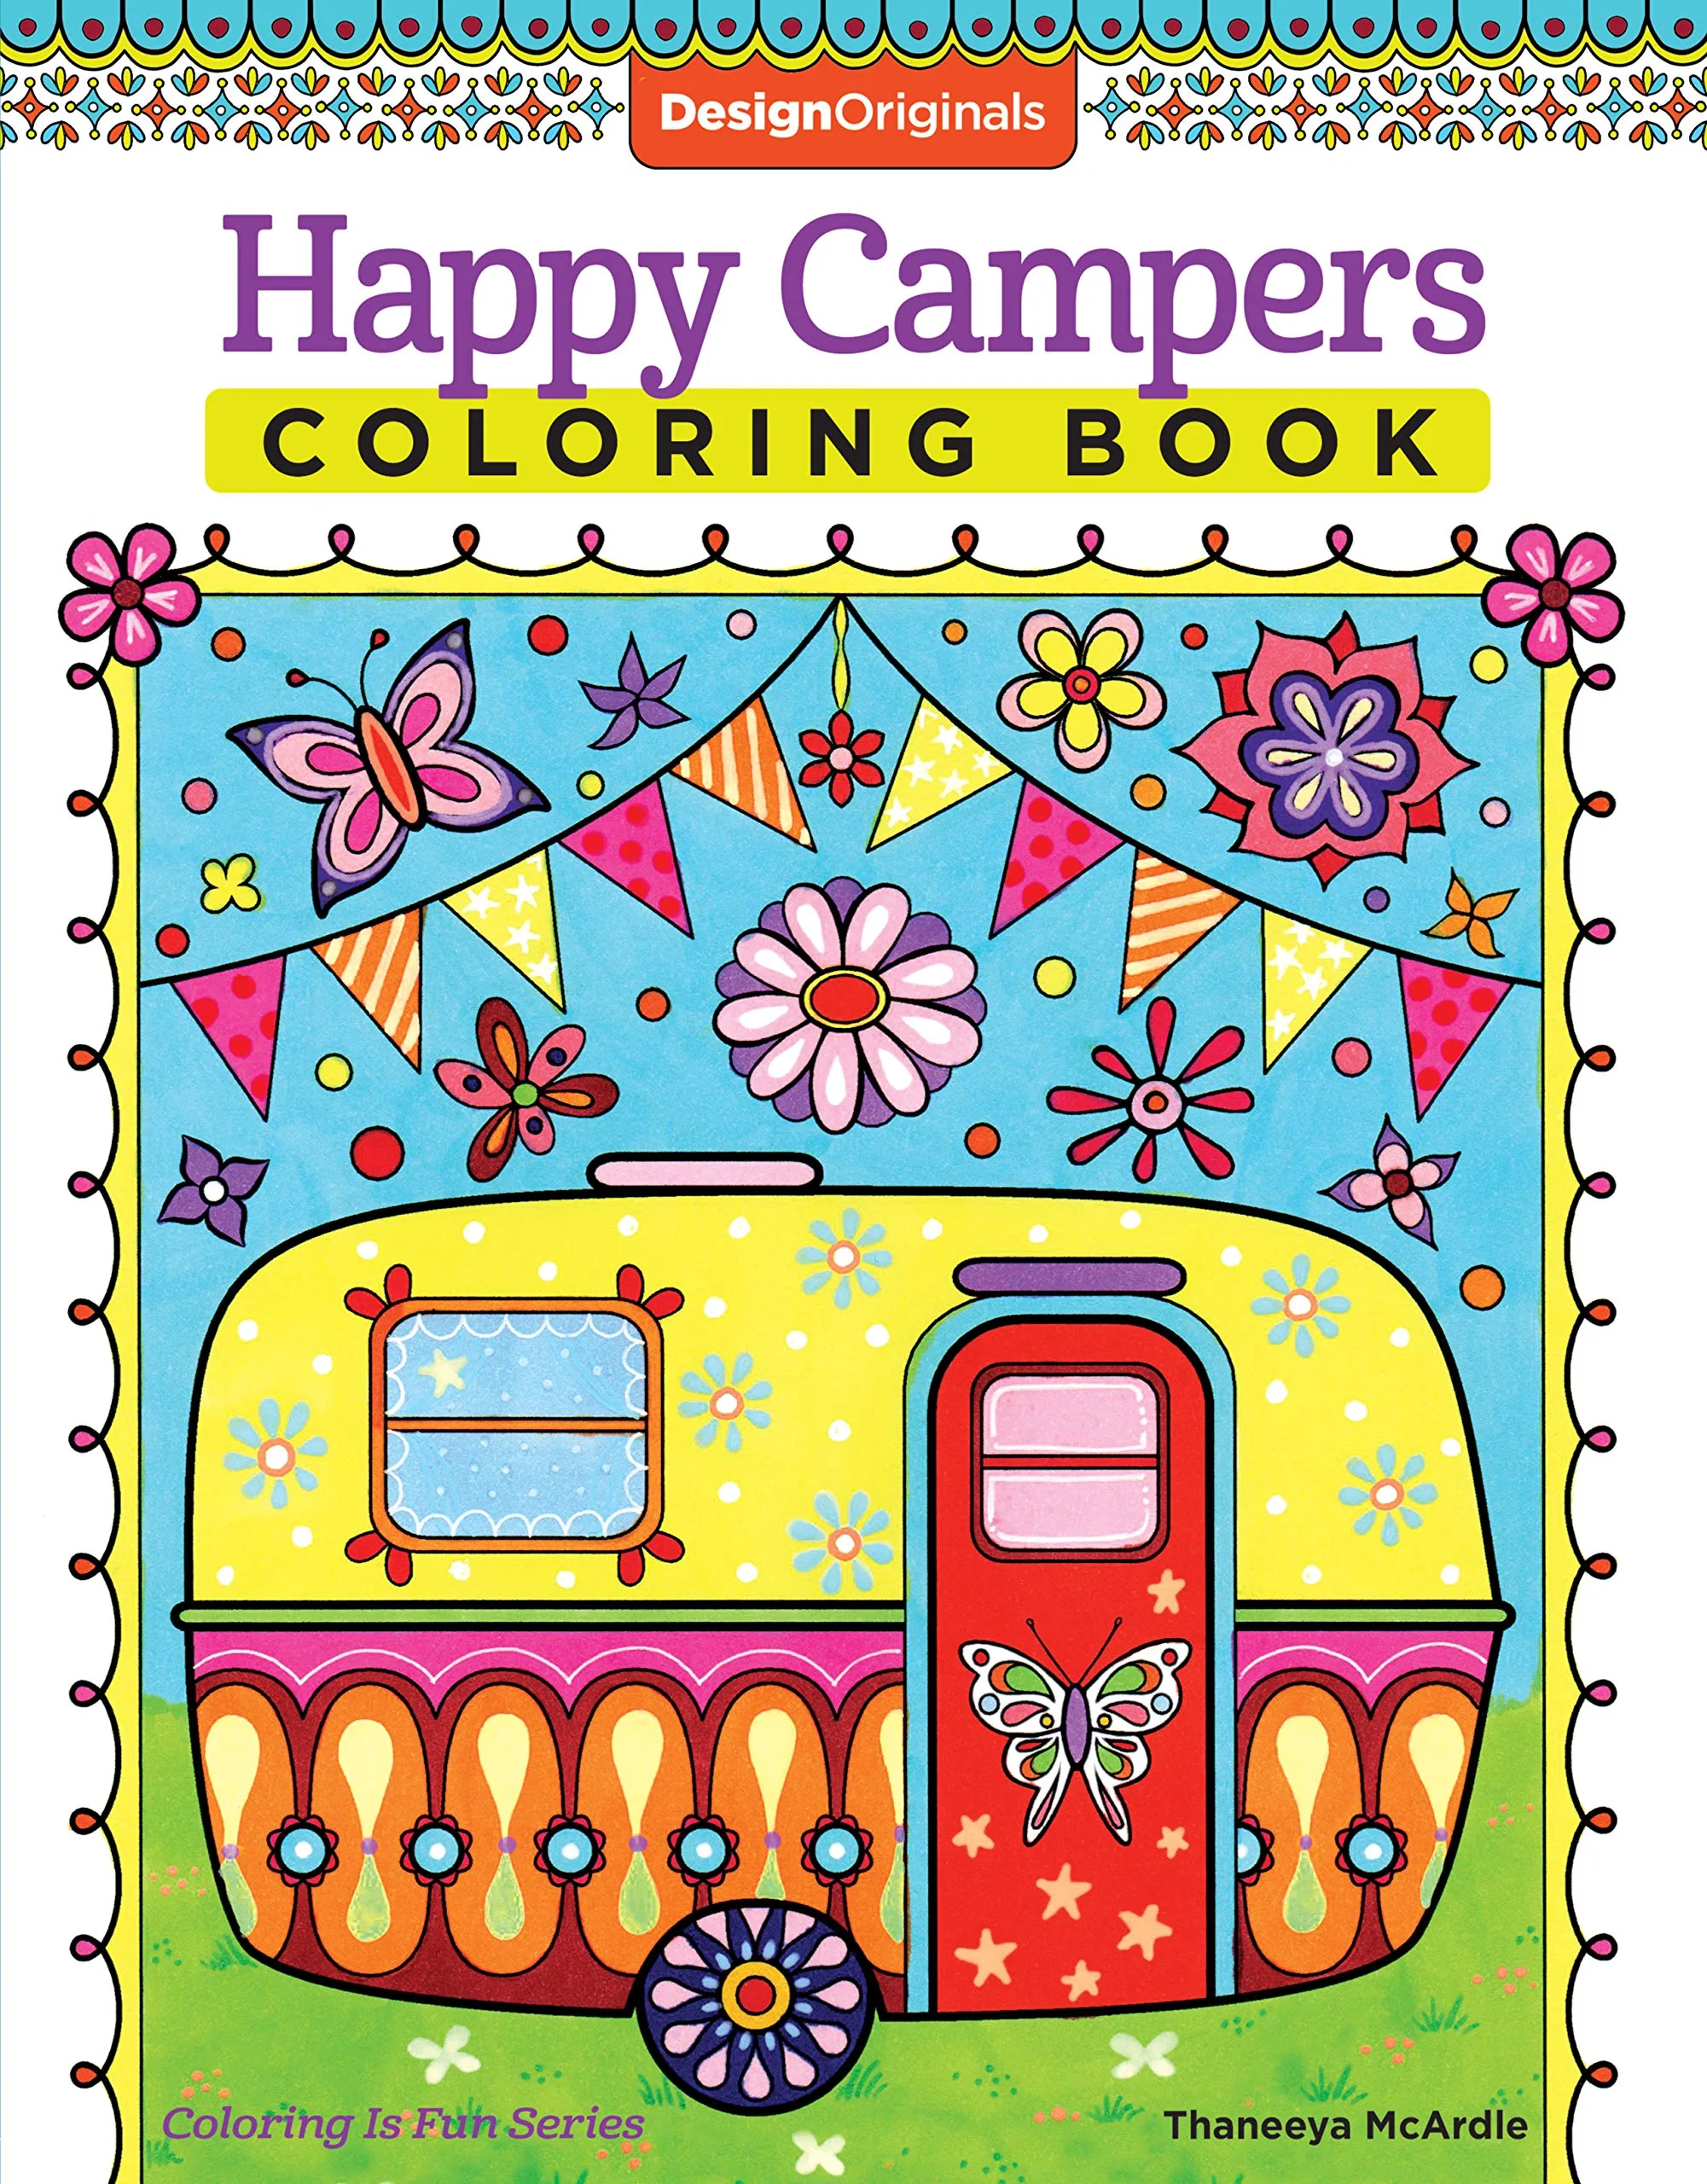 Happy Campers Coloring Book by Thaneeya Mcardle 